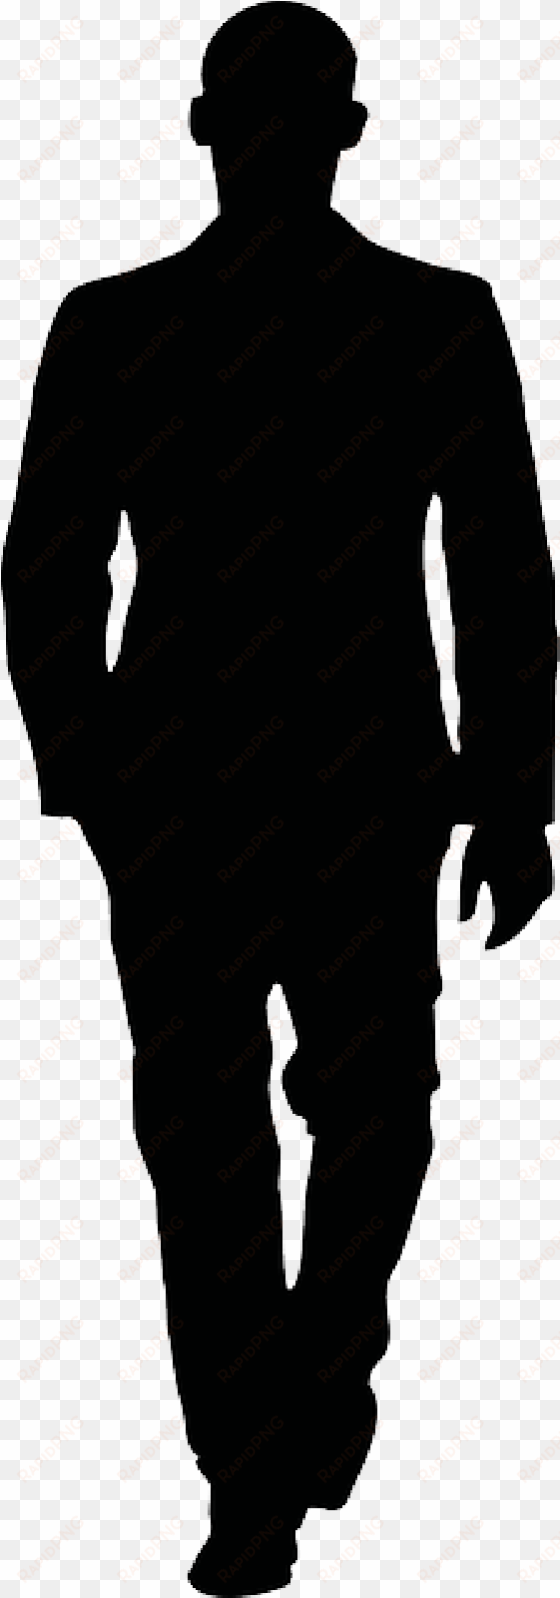 mb image/png - silhouette person walking forward